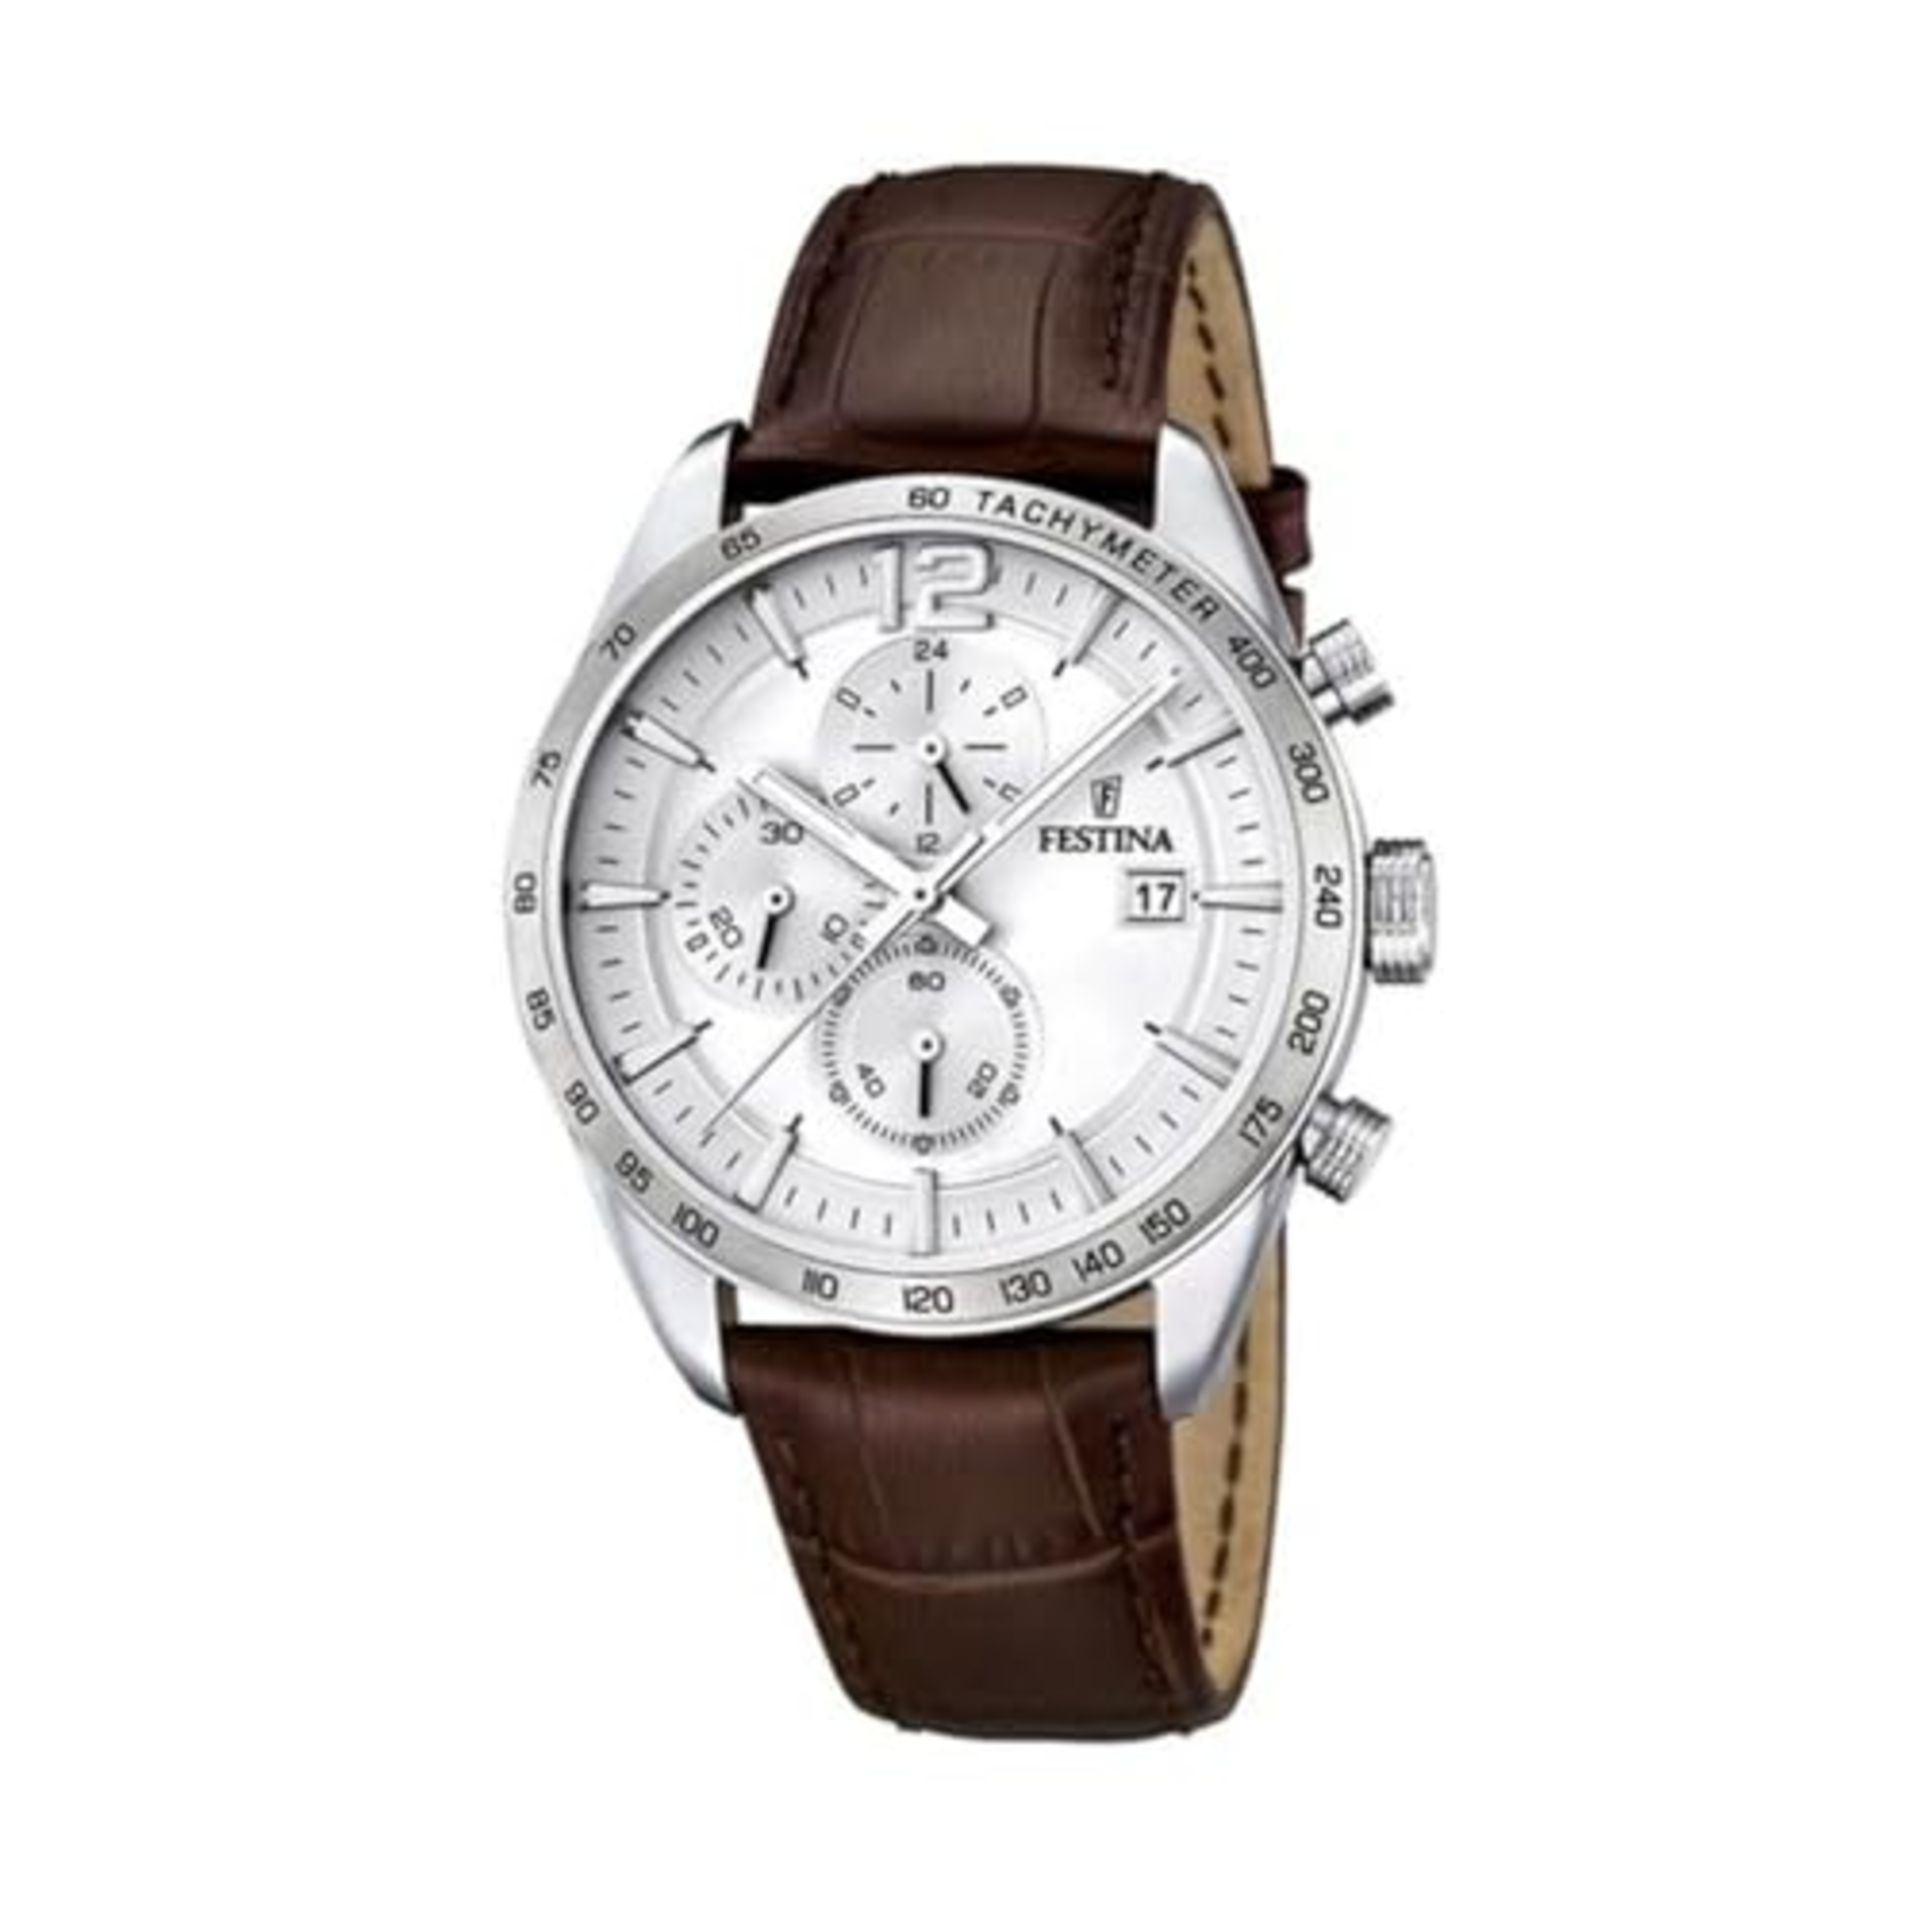 RRP £117.00 Festina Men's Watch F16760/1 Timeless Chronograph Stainless Steel Case 316L Grey Brown